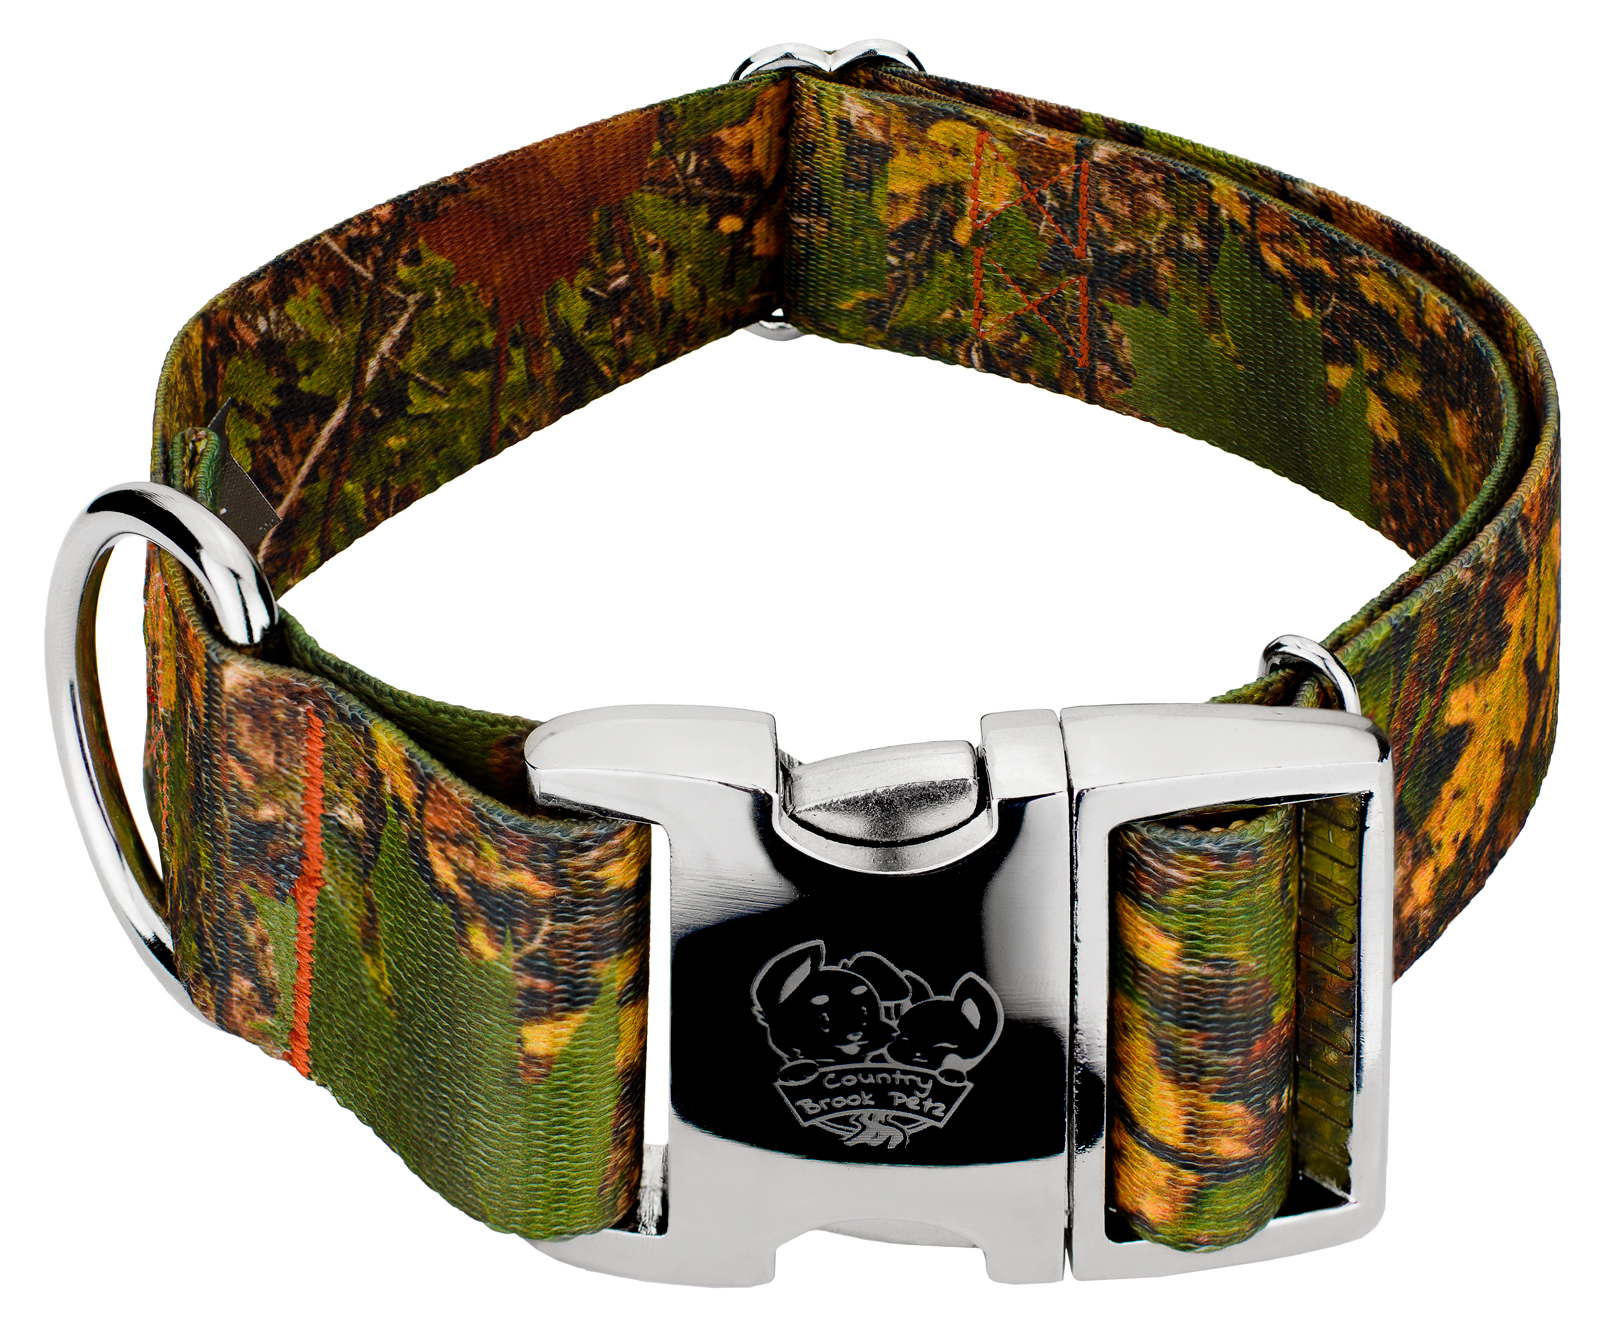 Country Brook Petz® 1 1/2 inch Premium Southern Forest Camo Dog Collar, Extra Large - image 1 of 5